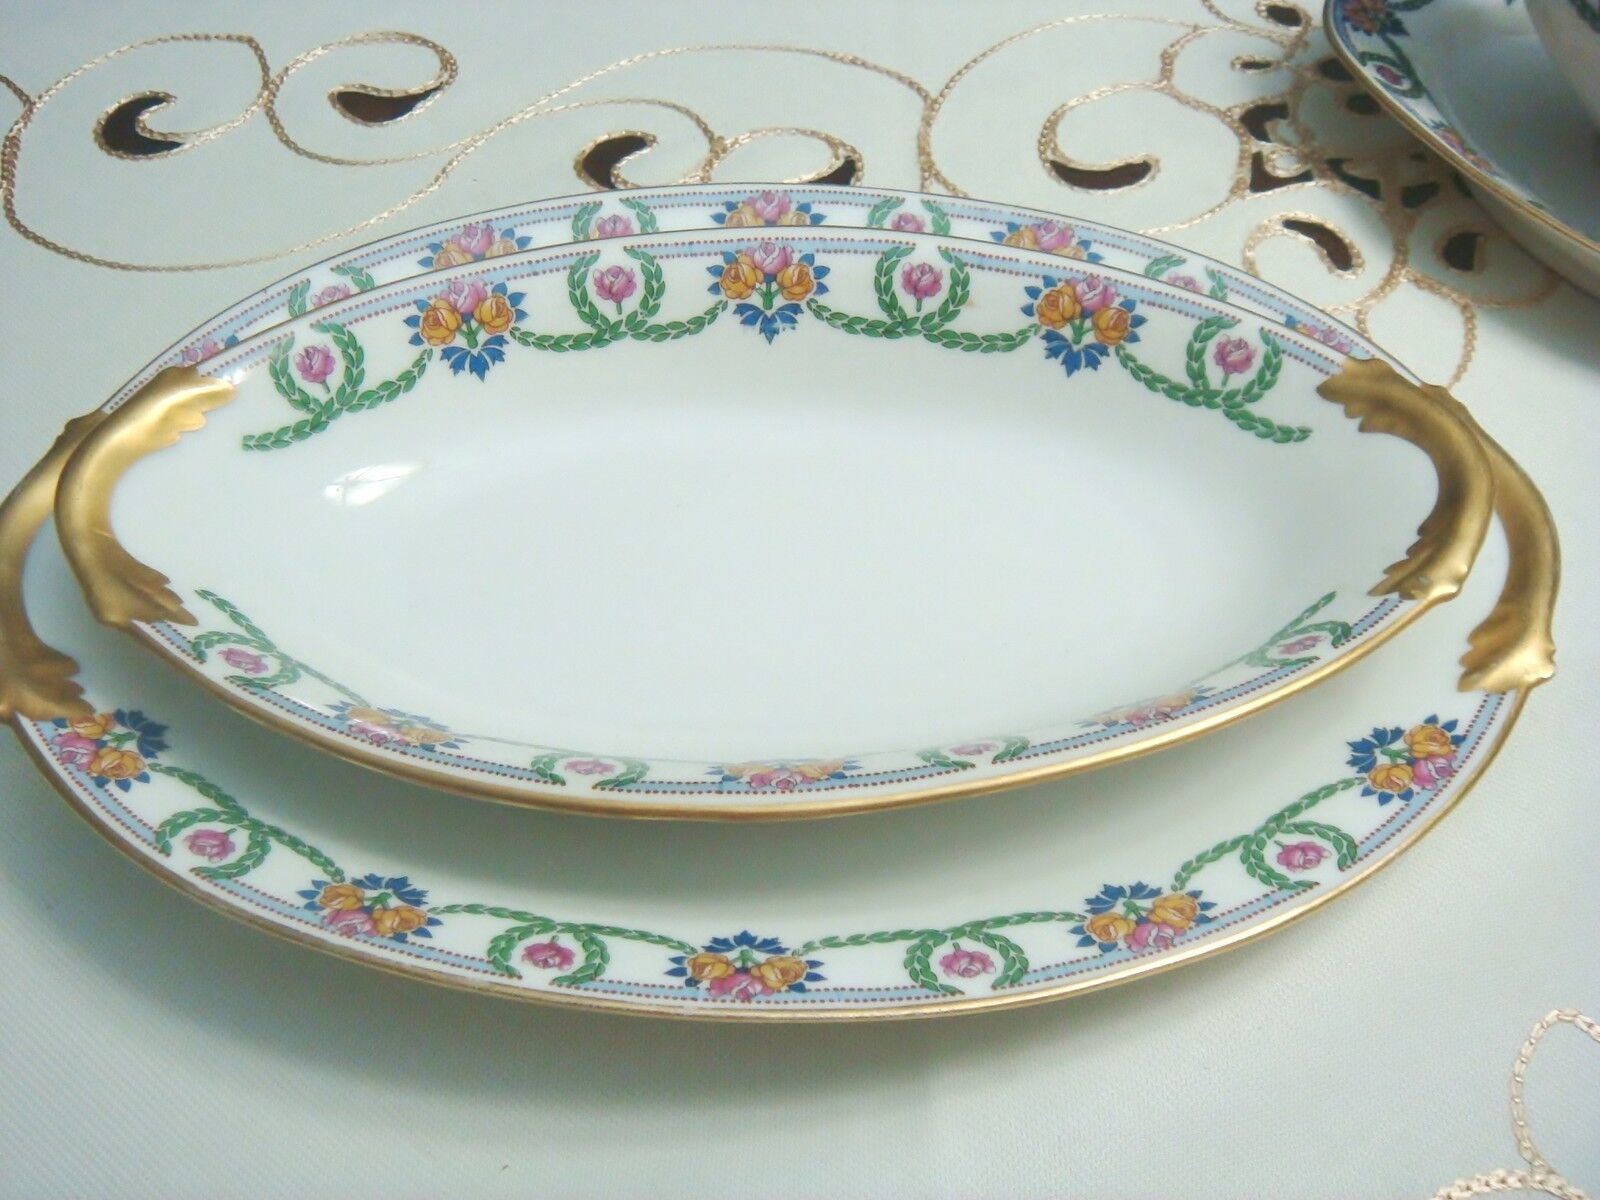 Primary image for Lucien Michelaud Fres Limoges France 1908-1962, 2 oval trays, golden handle [96B